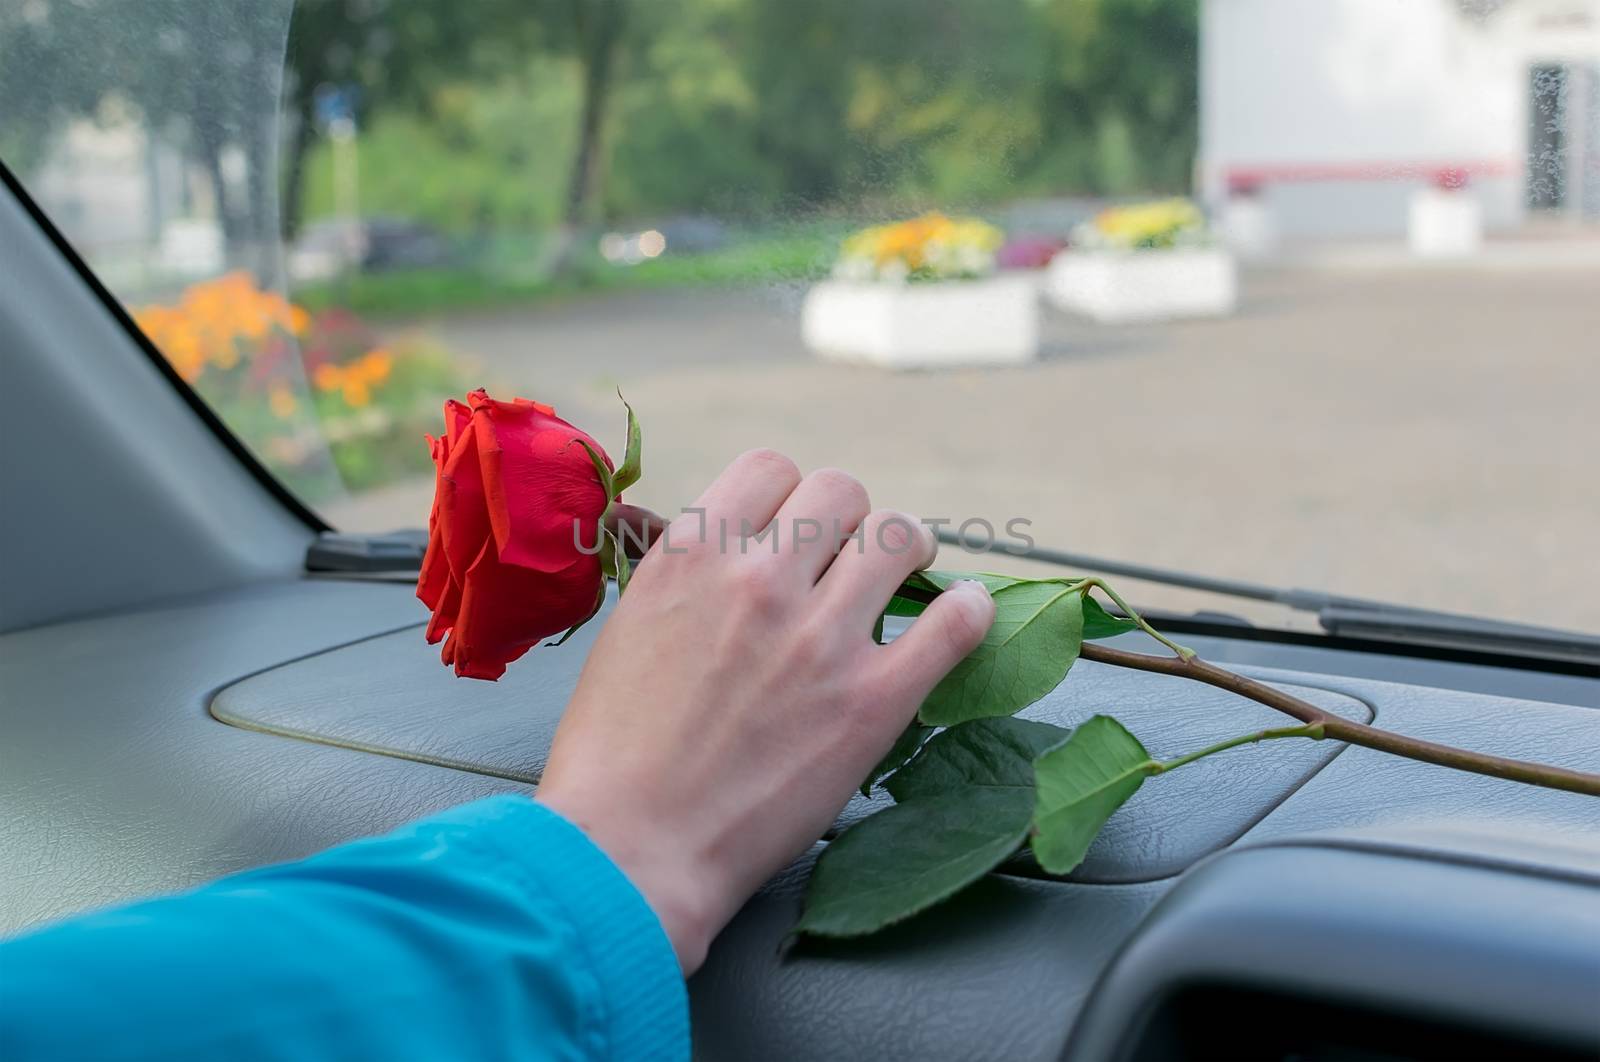 a woman hand takes a red rose flower that lies on the dashboard inside the car